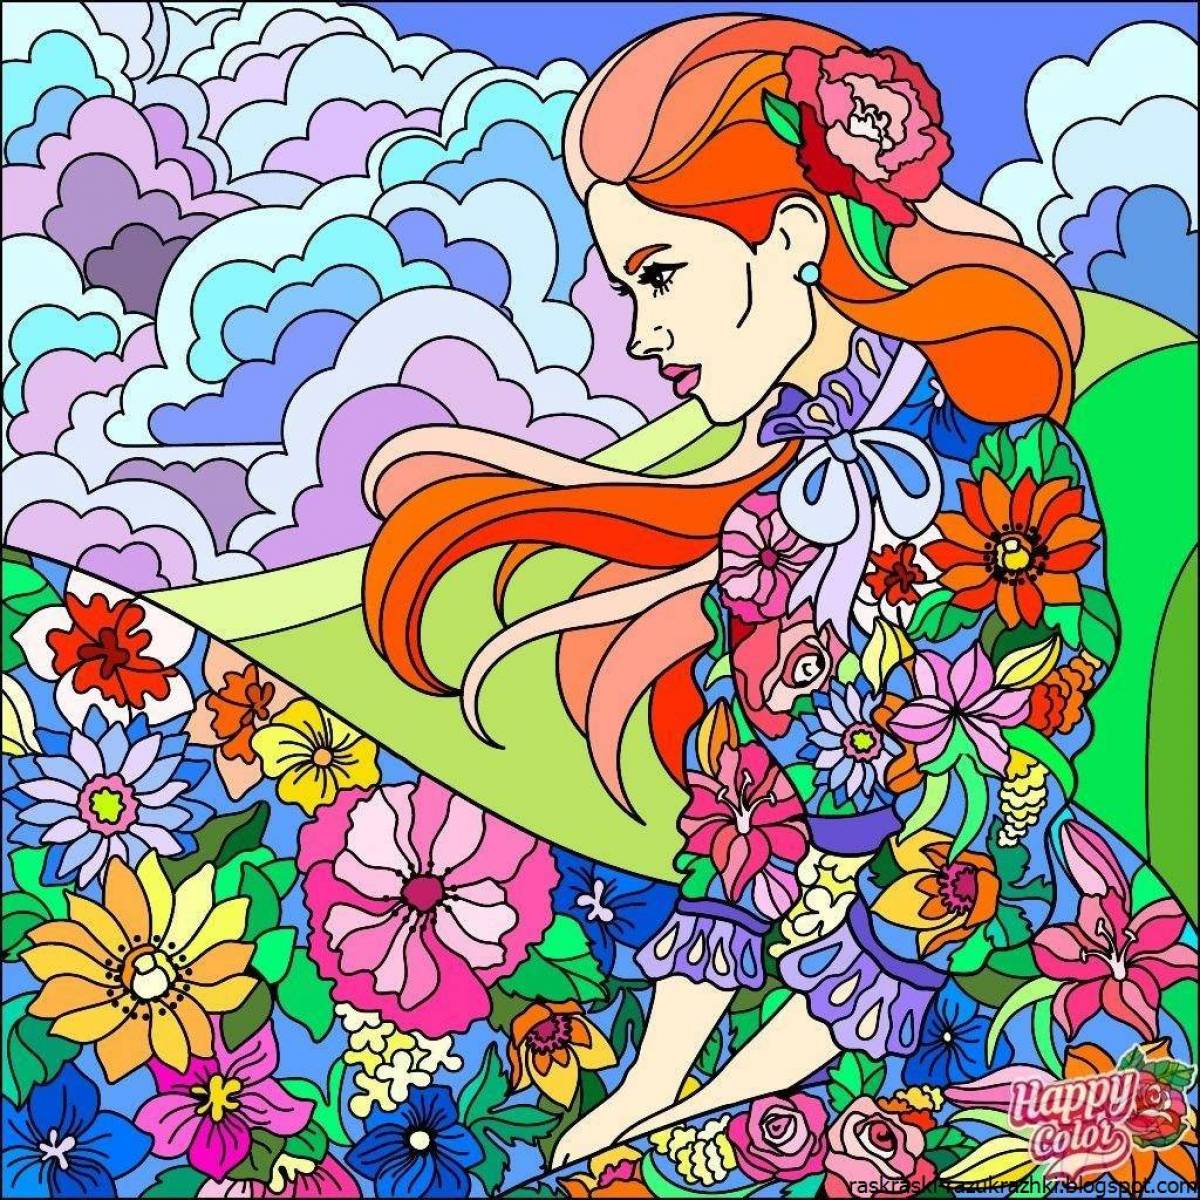 Dreamy coloring page drawn